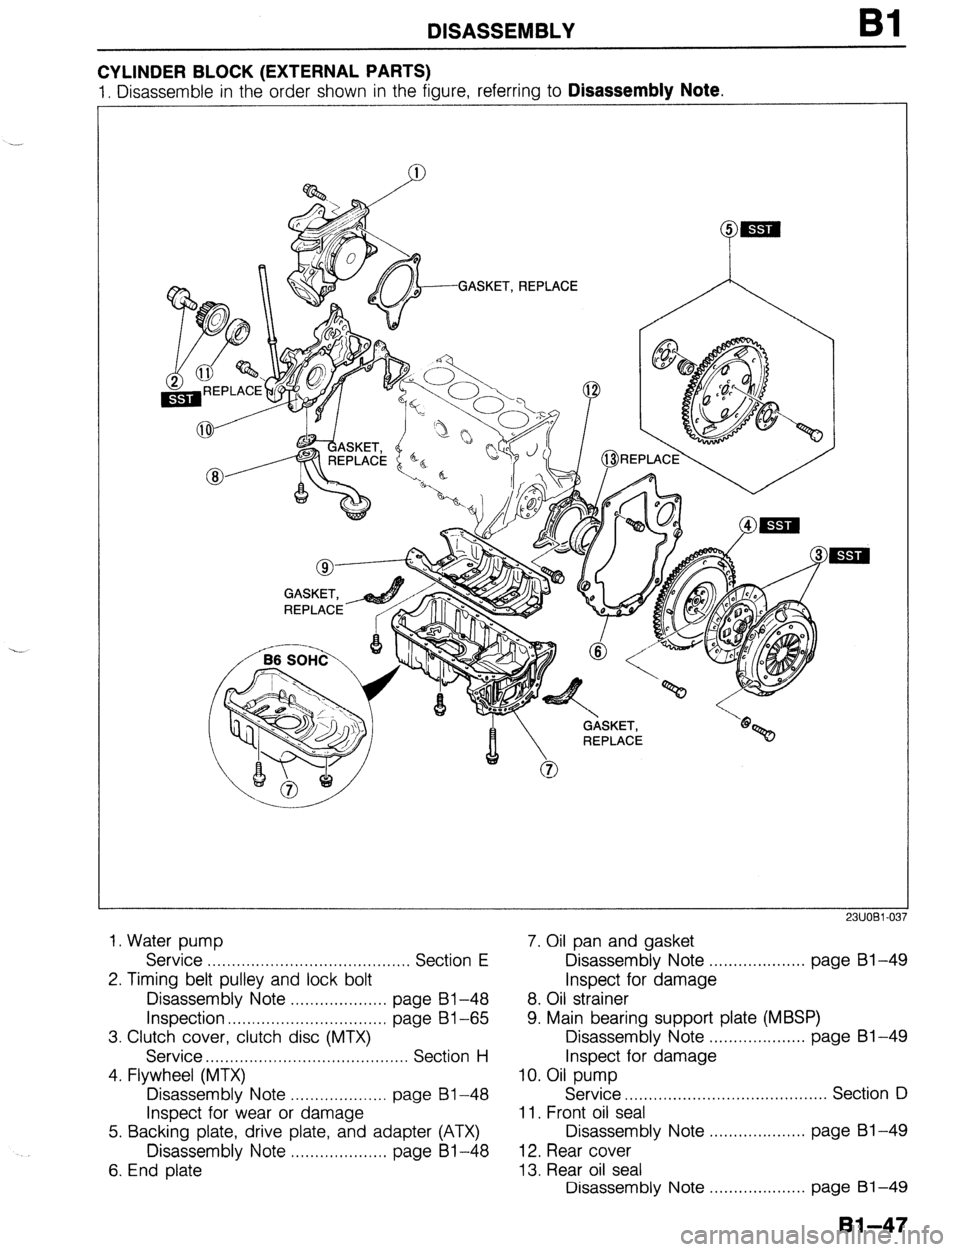 MAZDA PROTEGE 1992  Workshop Manual DISASSEMBLY Bl 
CYLINDER BLOCK (EXTERNAL PARTS) 
1. Disassemble in the order shown in the fiaure, referrina to Disassembly Note. 
.-. 
1. Water pump 
Service . . . . . . . . . . . . . . . . . . . . . 